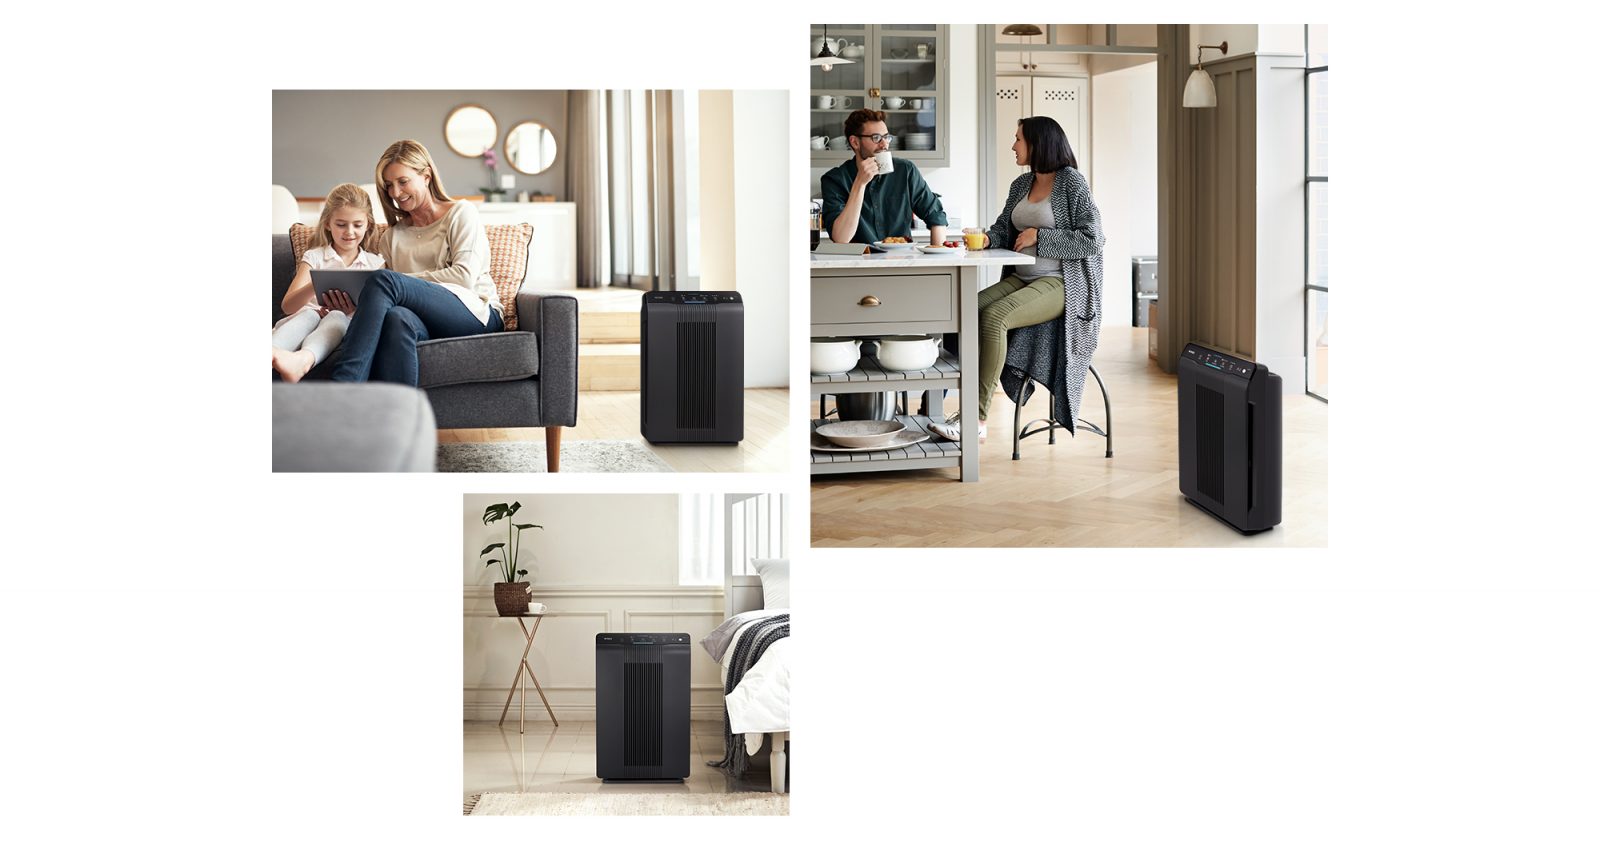 Three images of 5500-2 Air Purifier on floor next to adult and child on couch, on floor next to two adults sitting at a table, and on the floor next to a bed